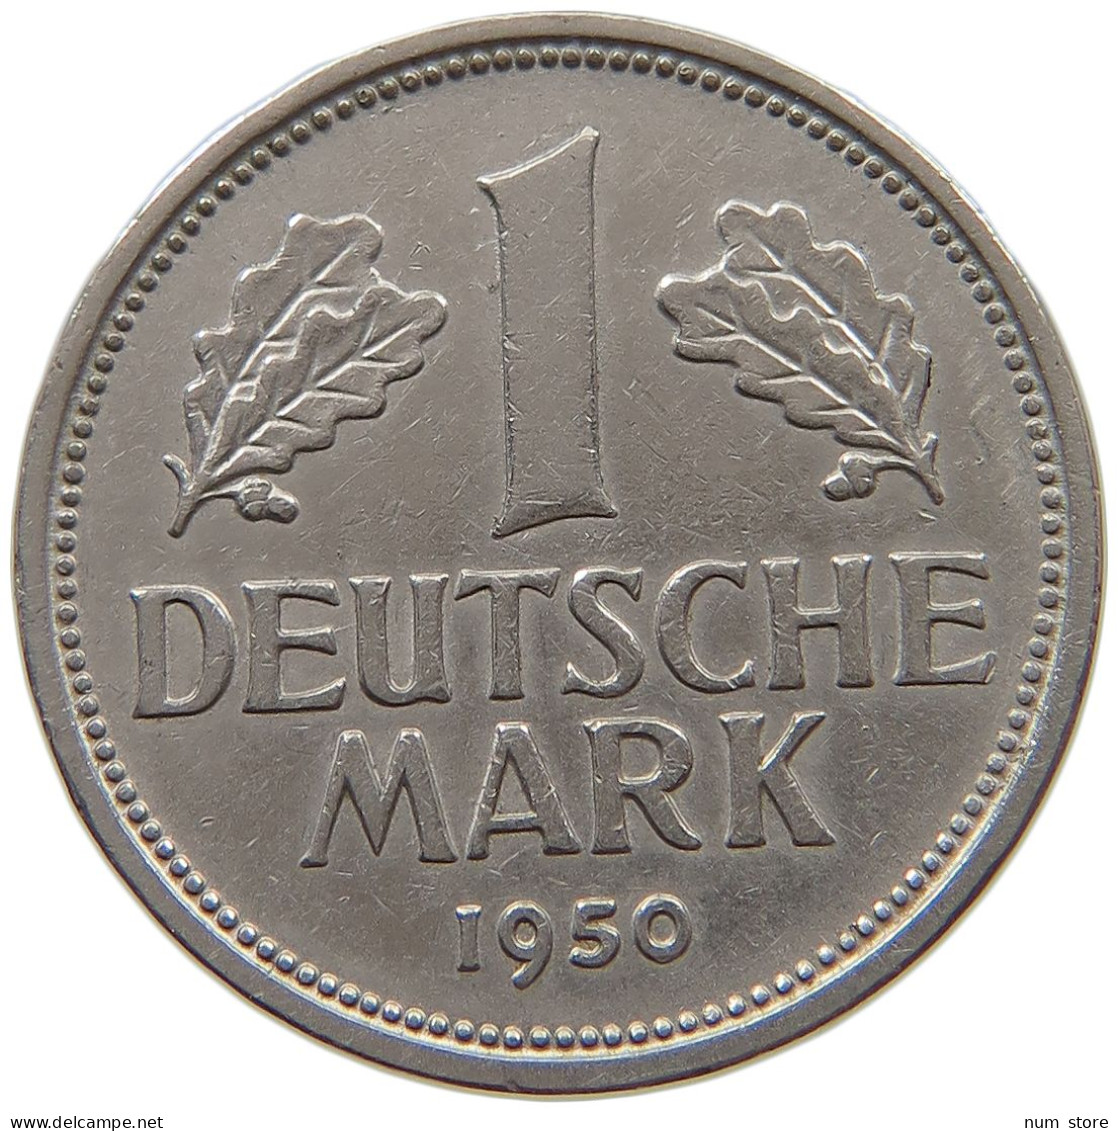 GERMANY WEST 1 MARK 1950 J #a072 0237 - 1 Marco